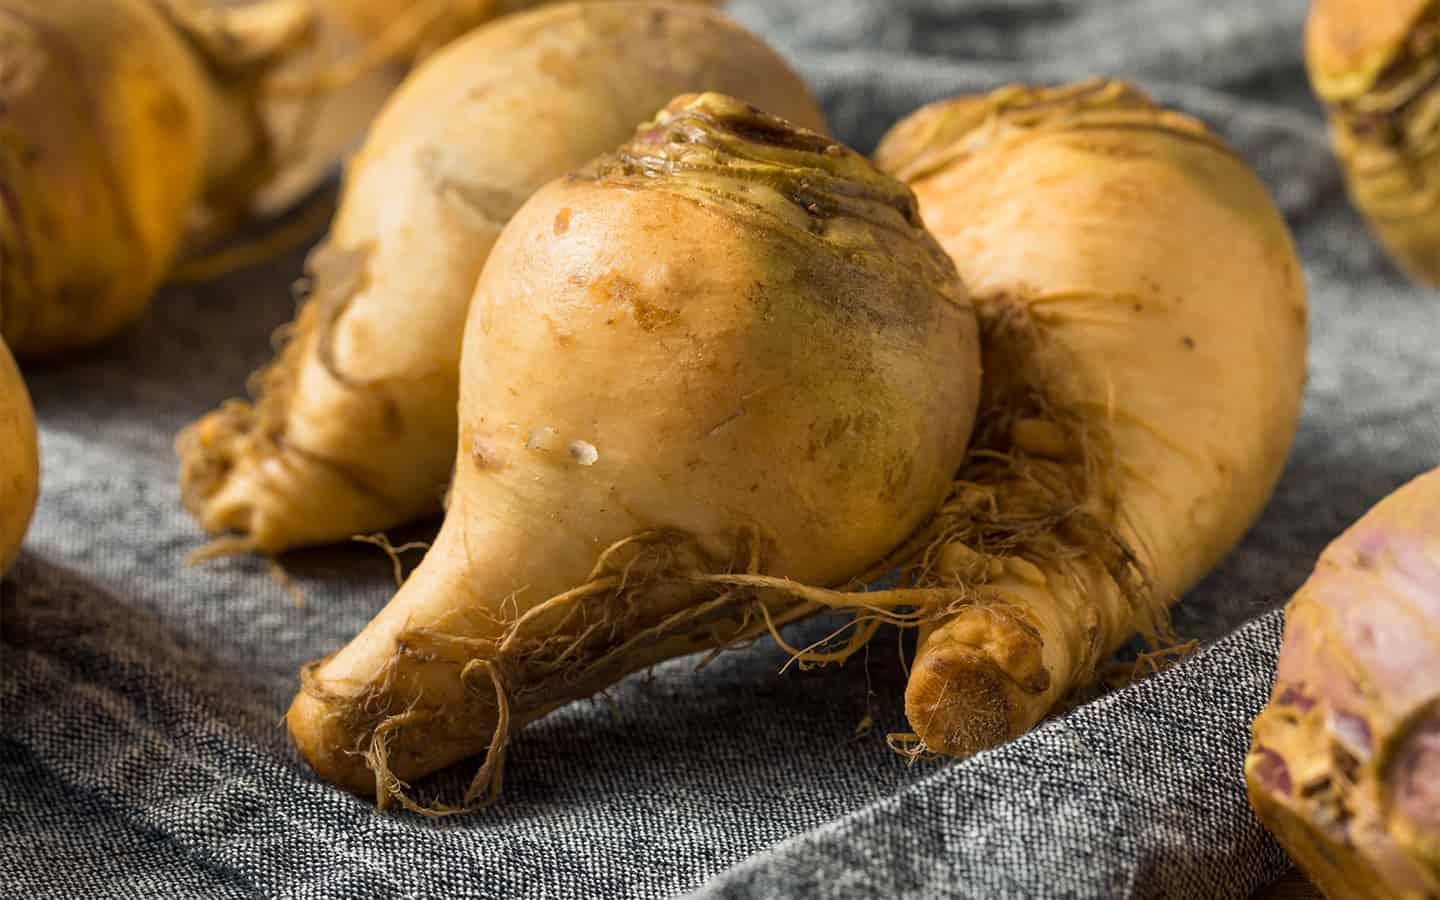                      Getting to the root of a tasty use for an overlooked vegetable                             
                     